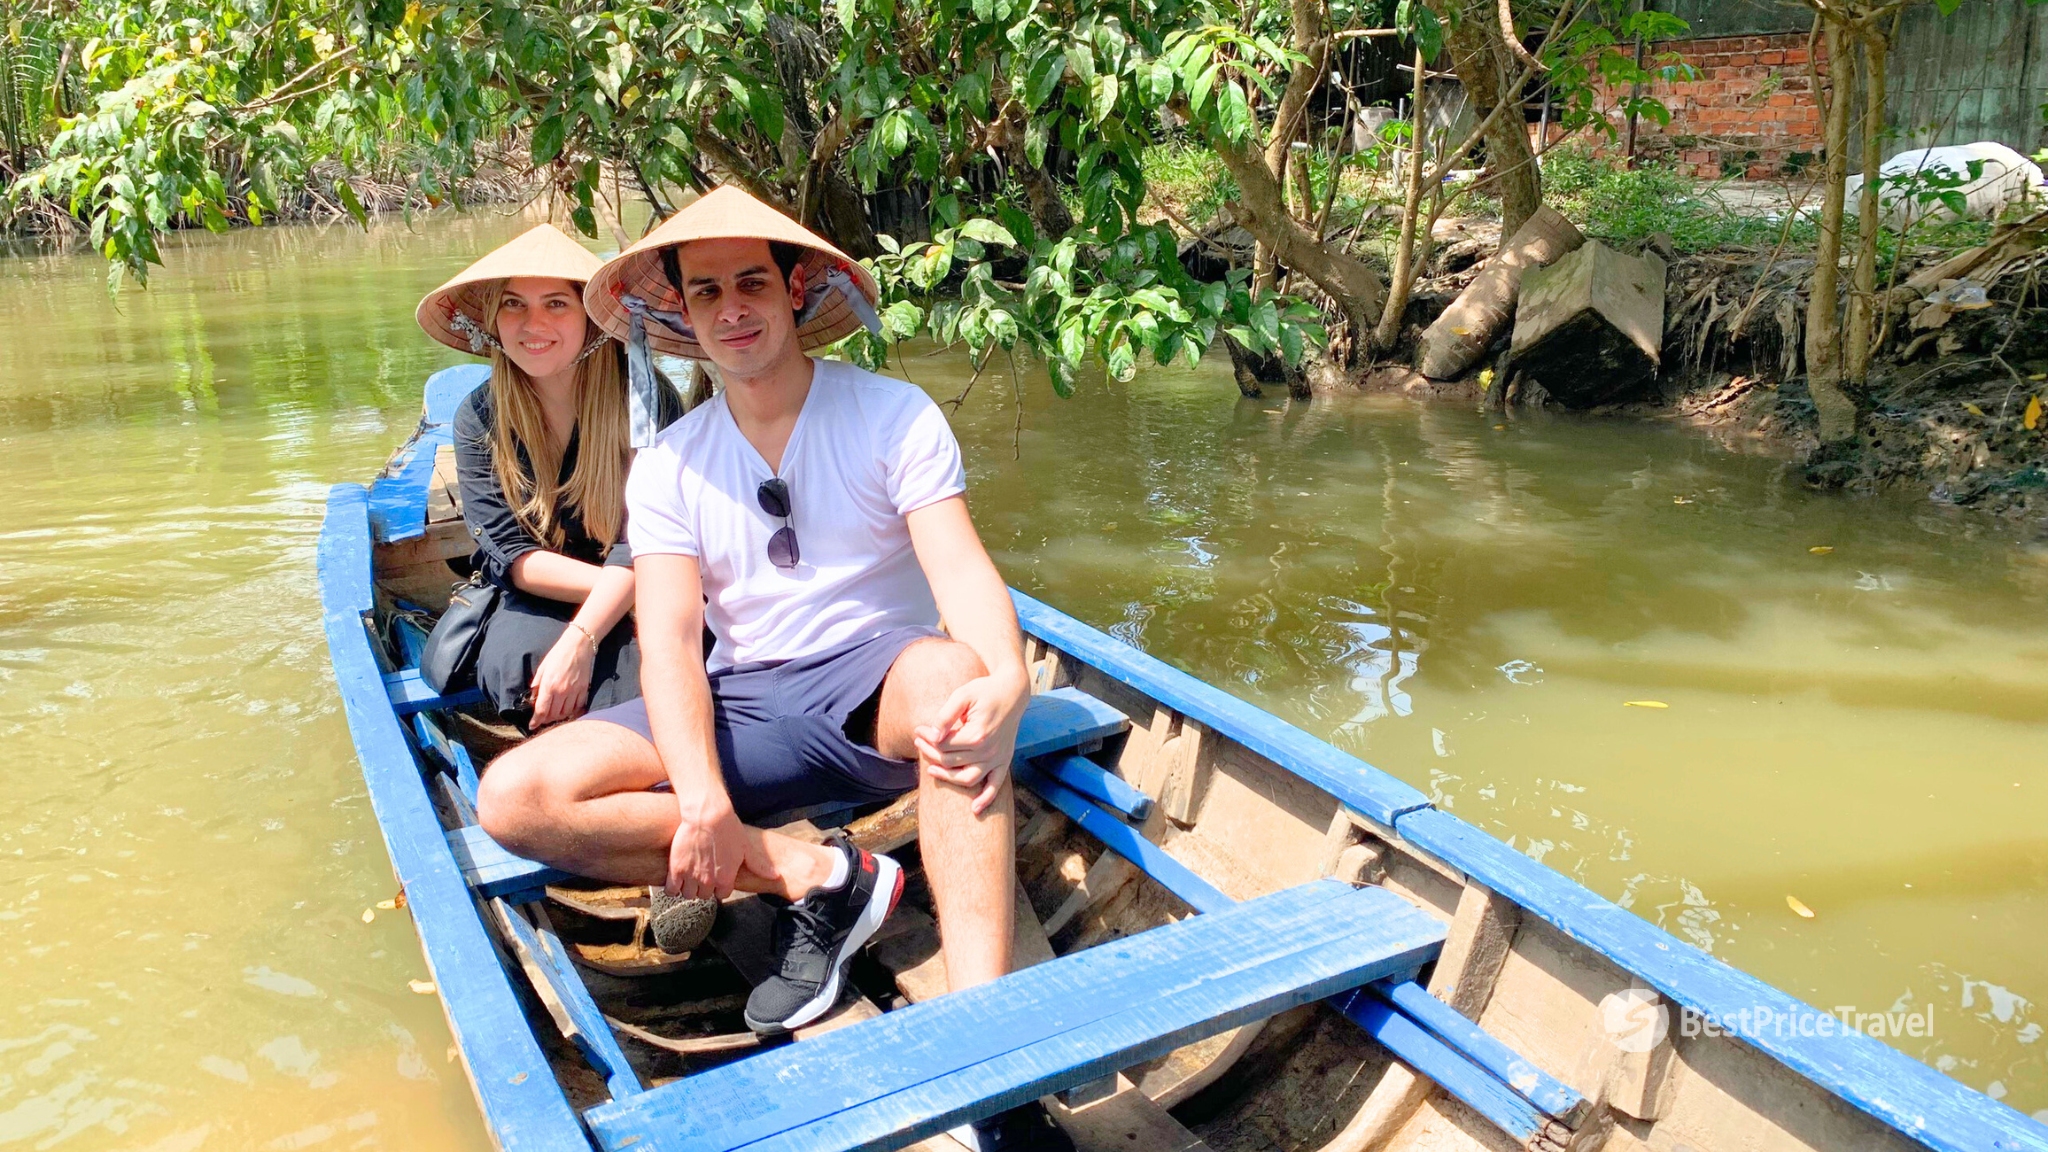 Day 4 Explore The Tranquillity Of Mekong Delta